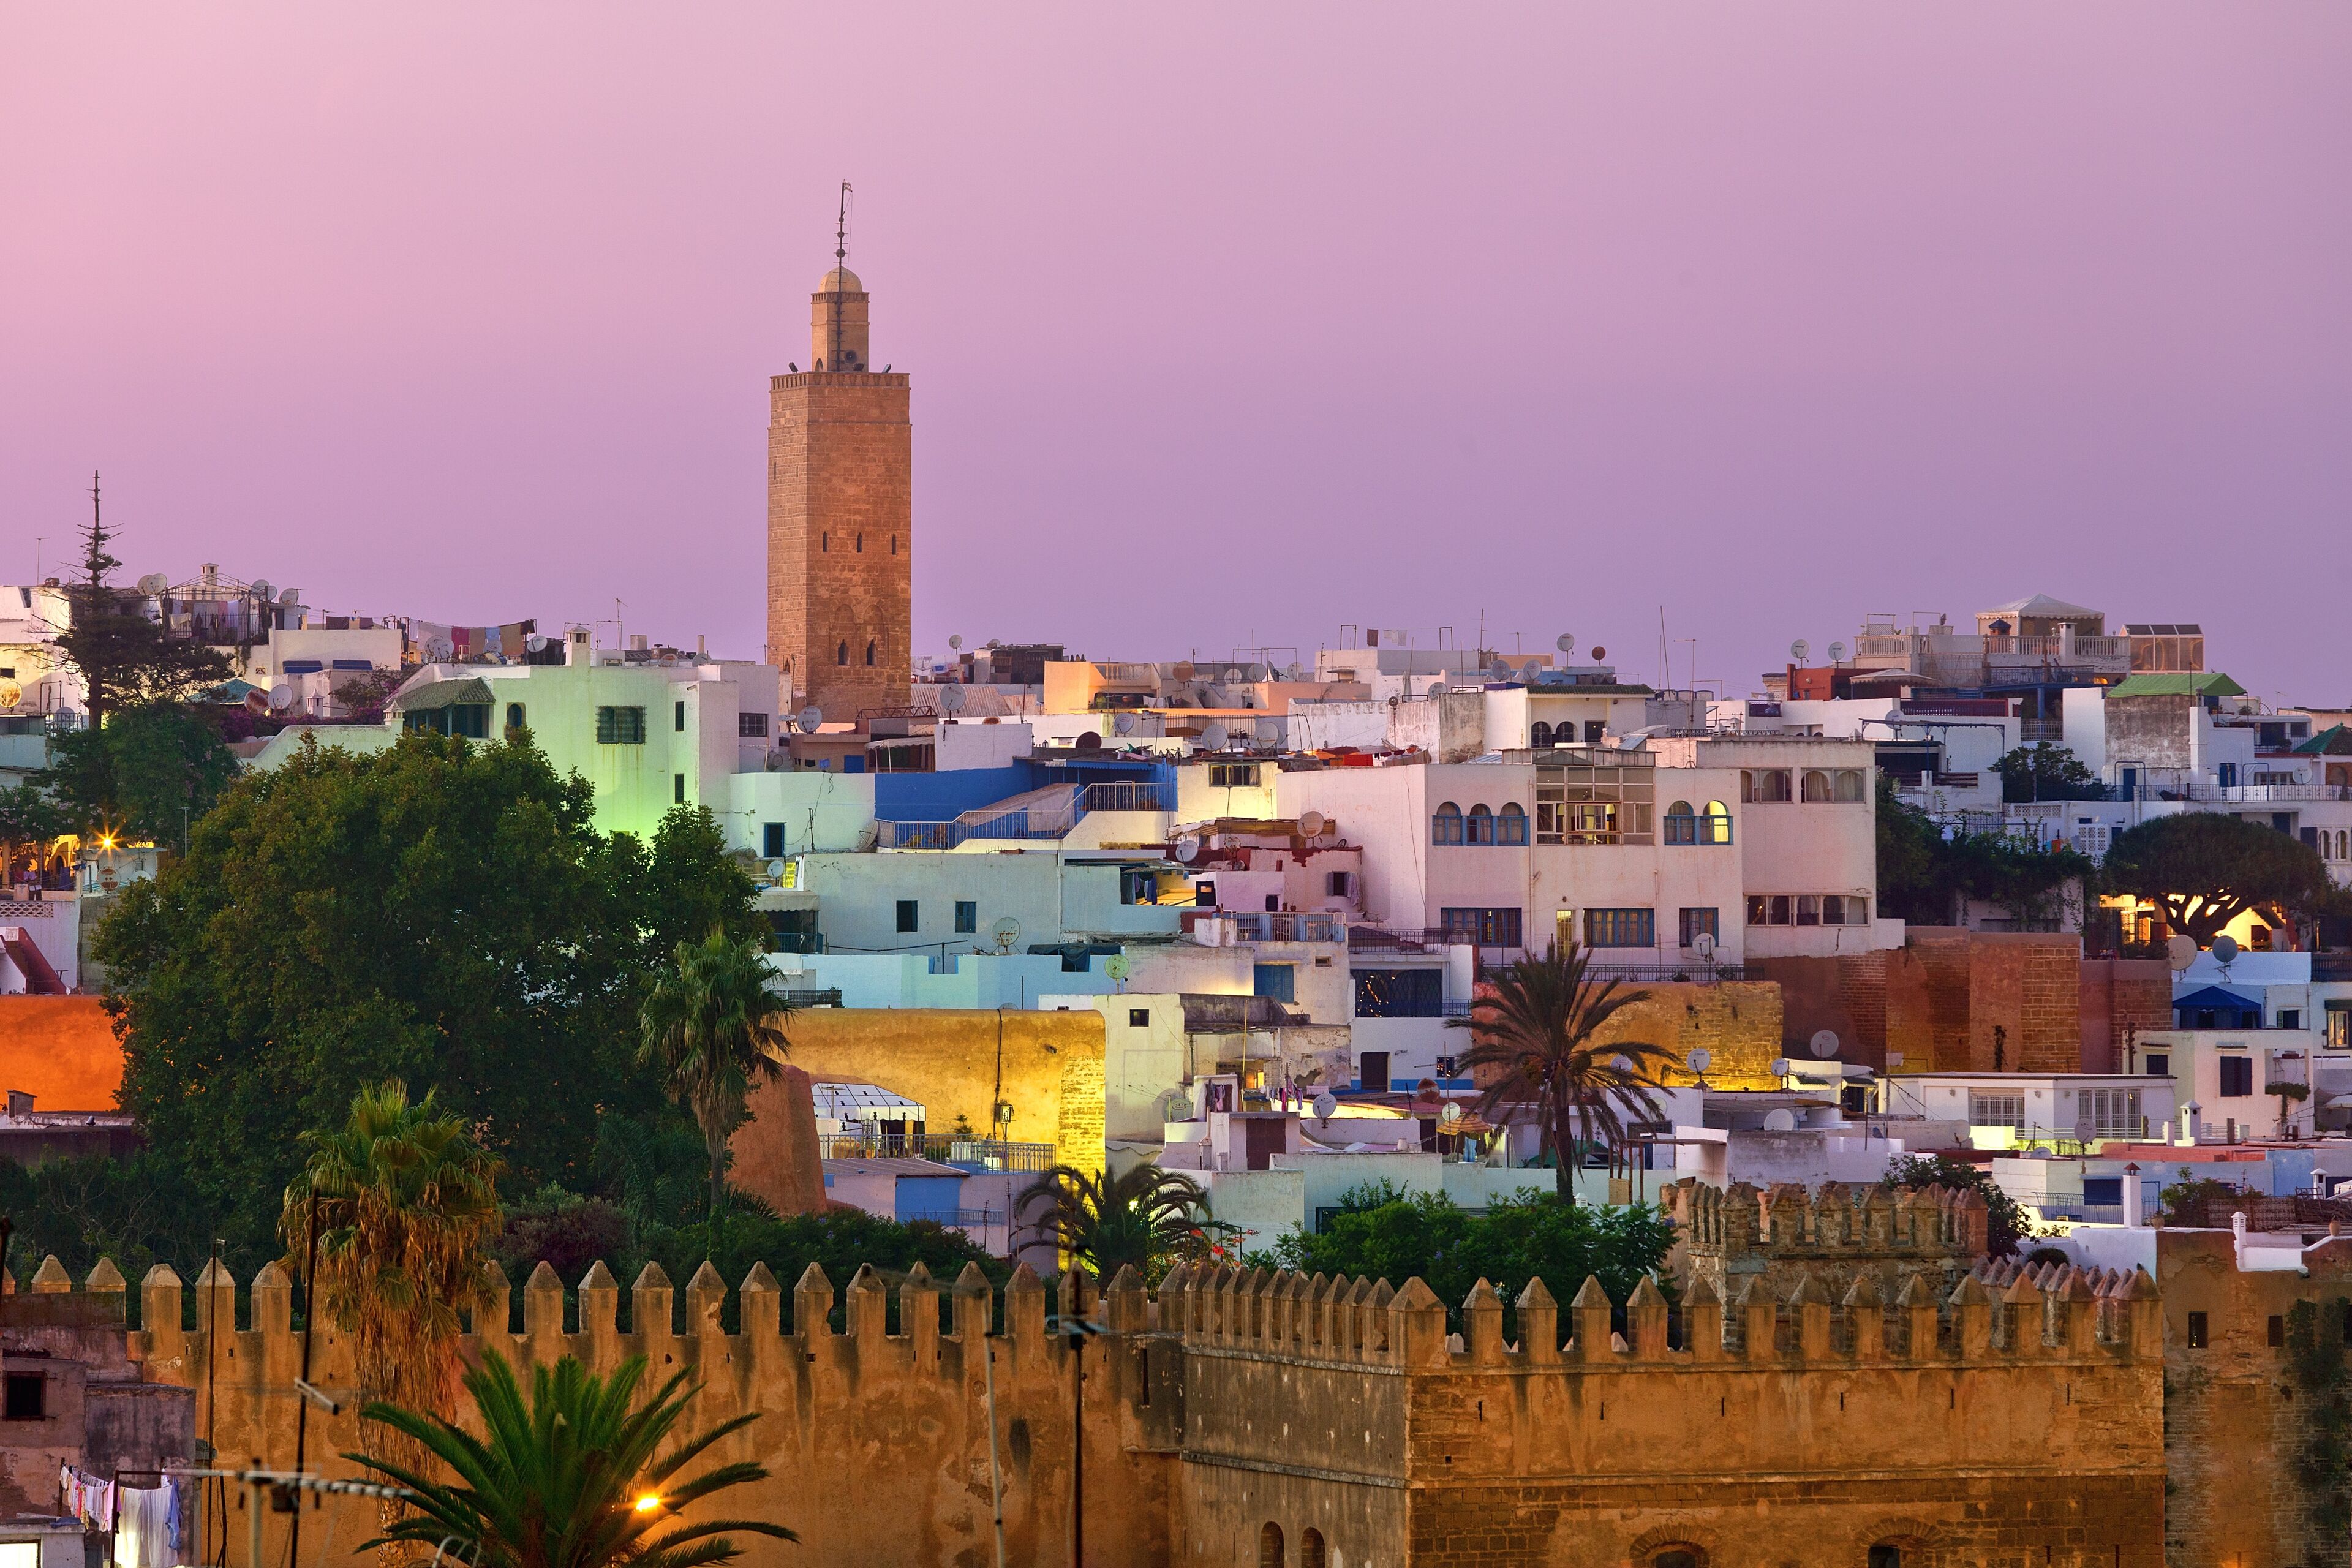 View of the Kasbah des Oudayas buildings at dusk. Africa, North Africa, Morocco, Rabat